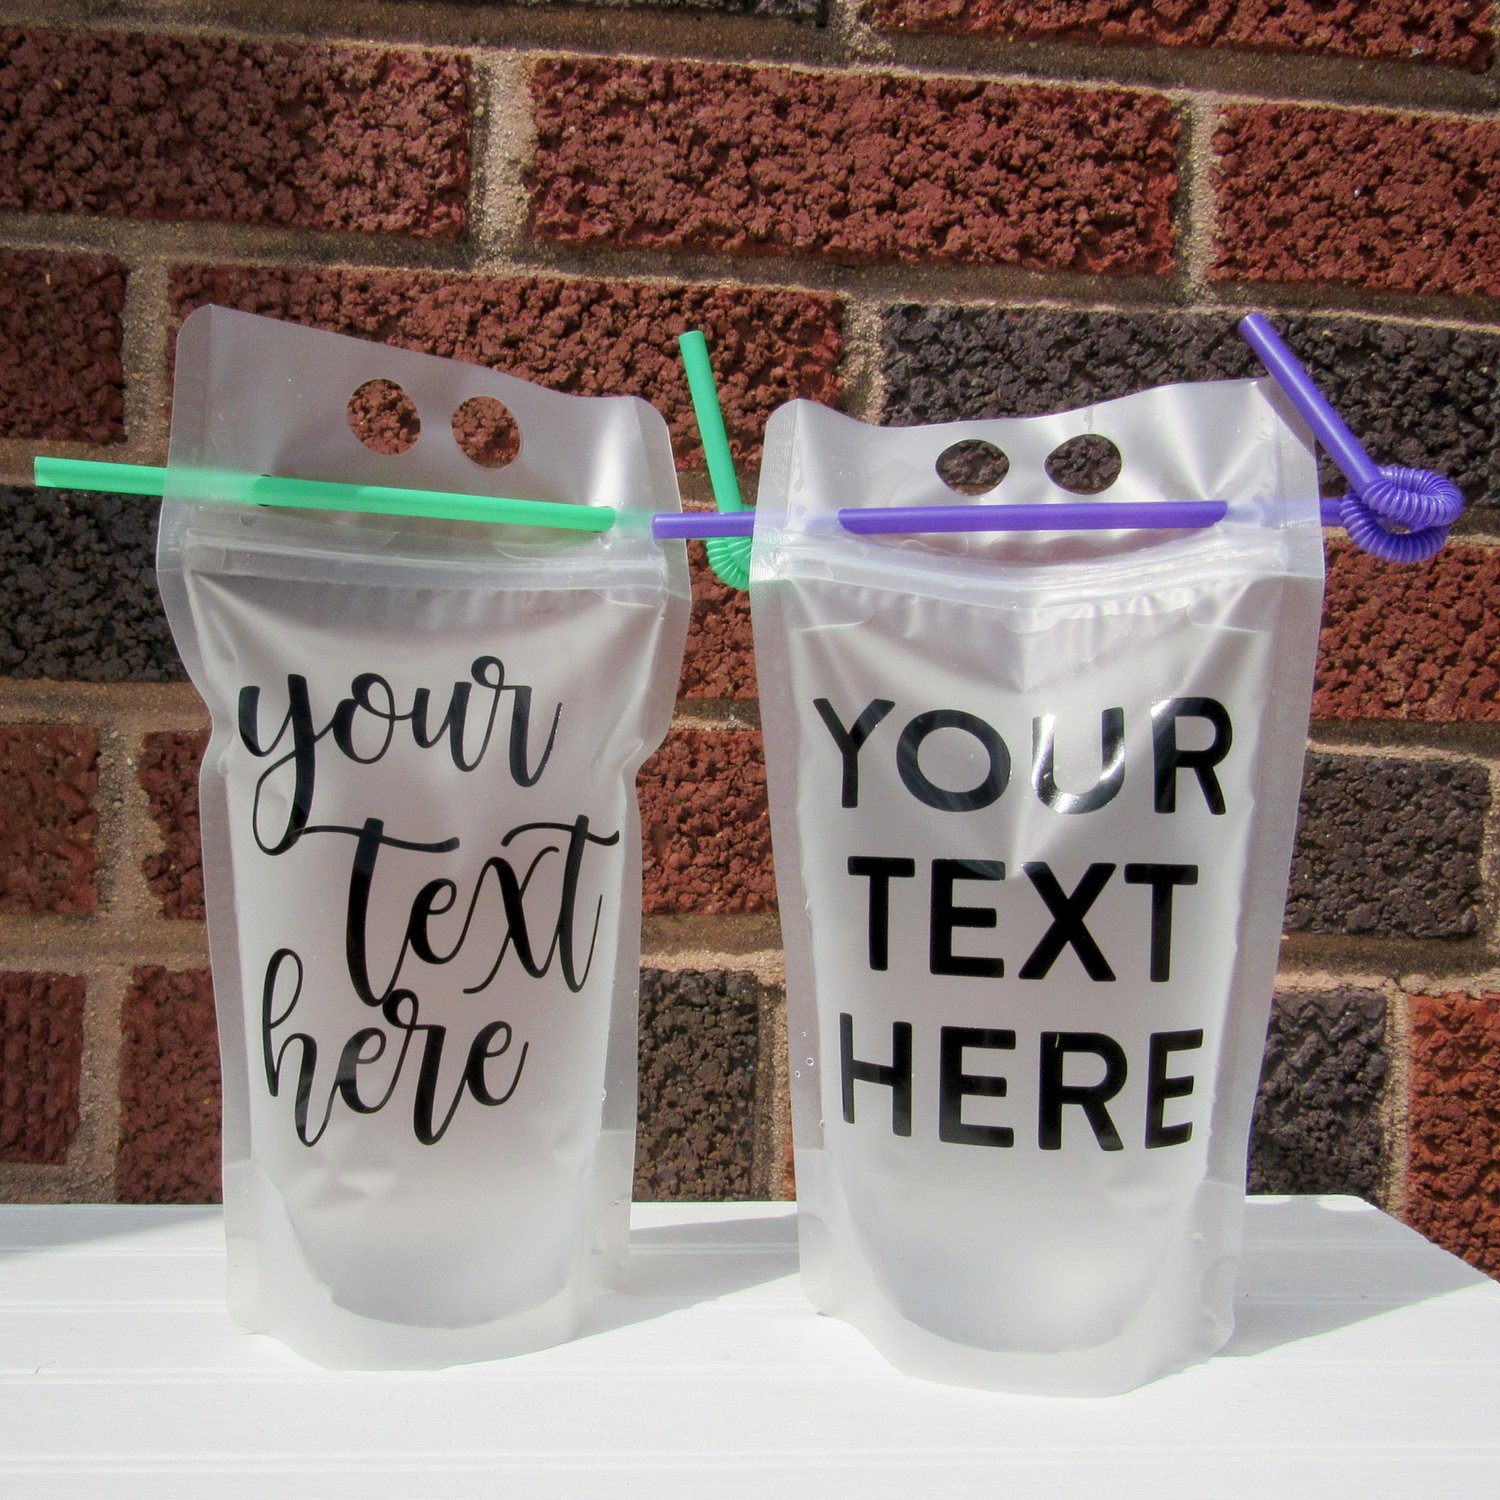 Reusable Drink Pouches Adult Juice Boxes with Decorative Sticker